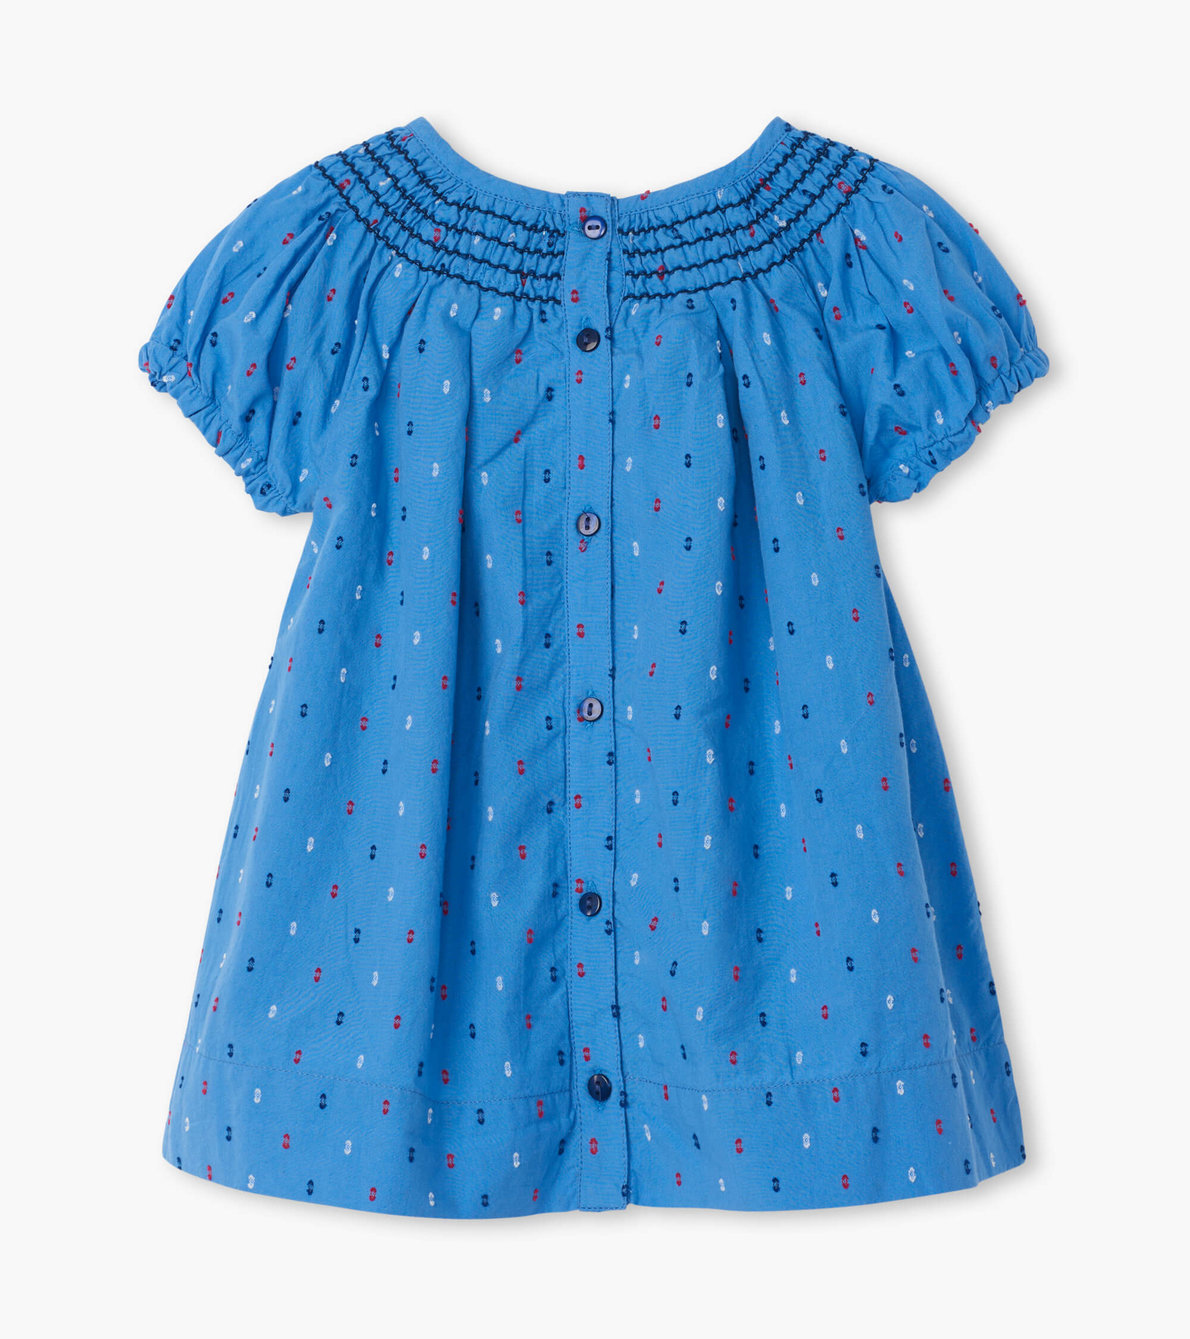 View larger image of Nautical Swiss Dots Baby Smocked Dress